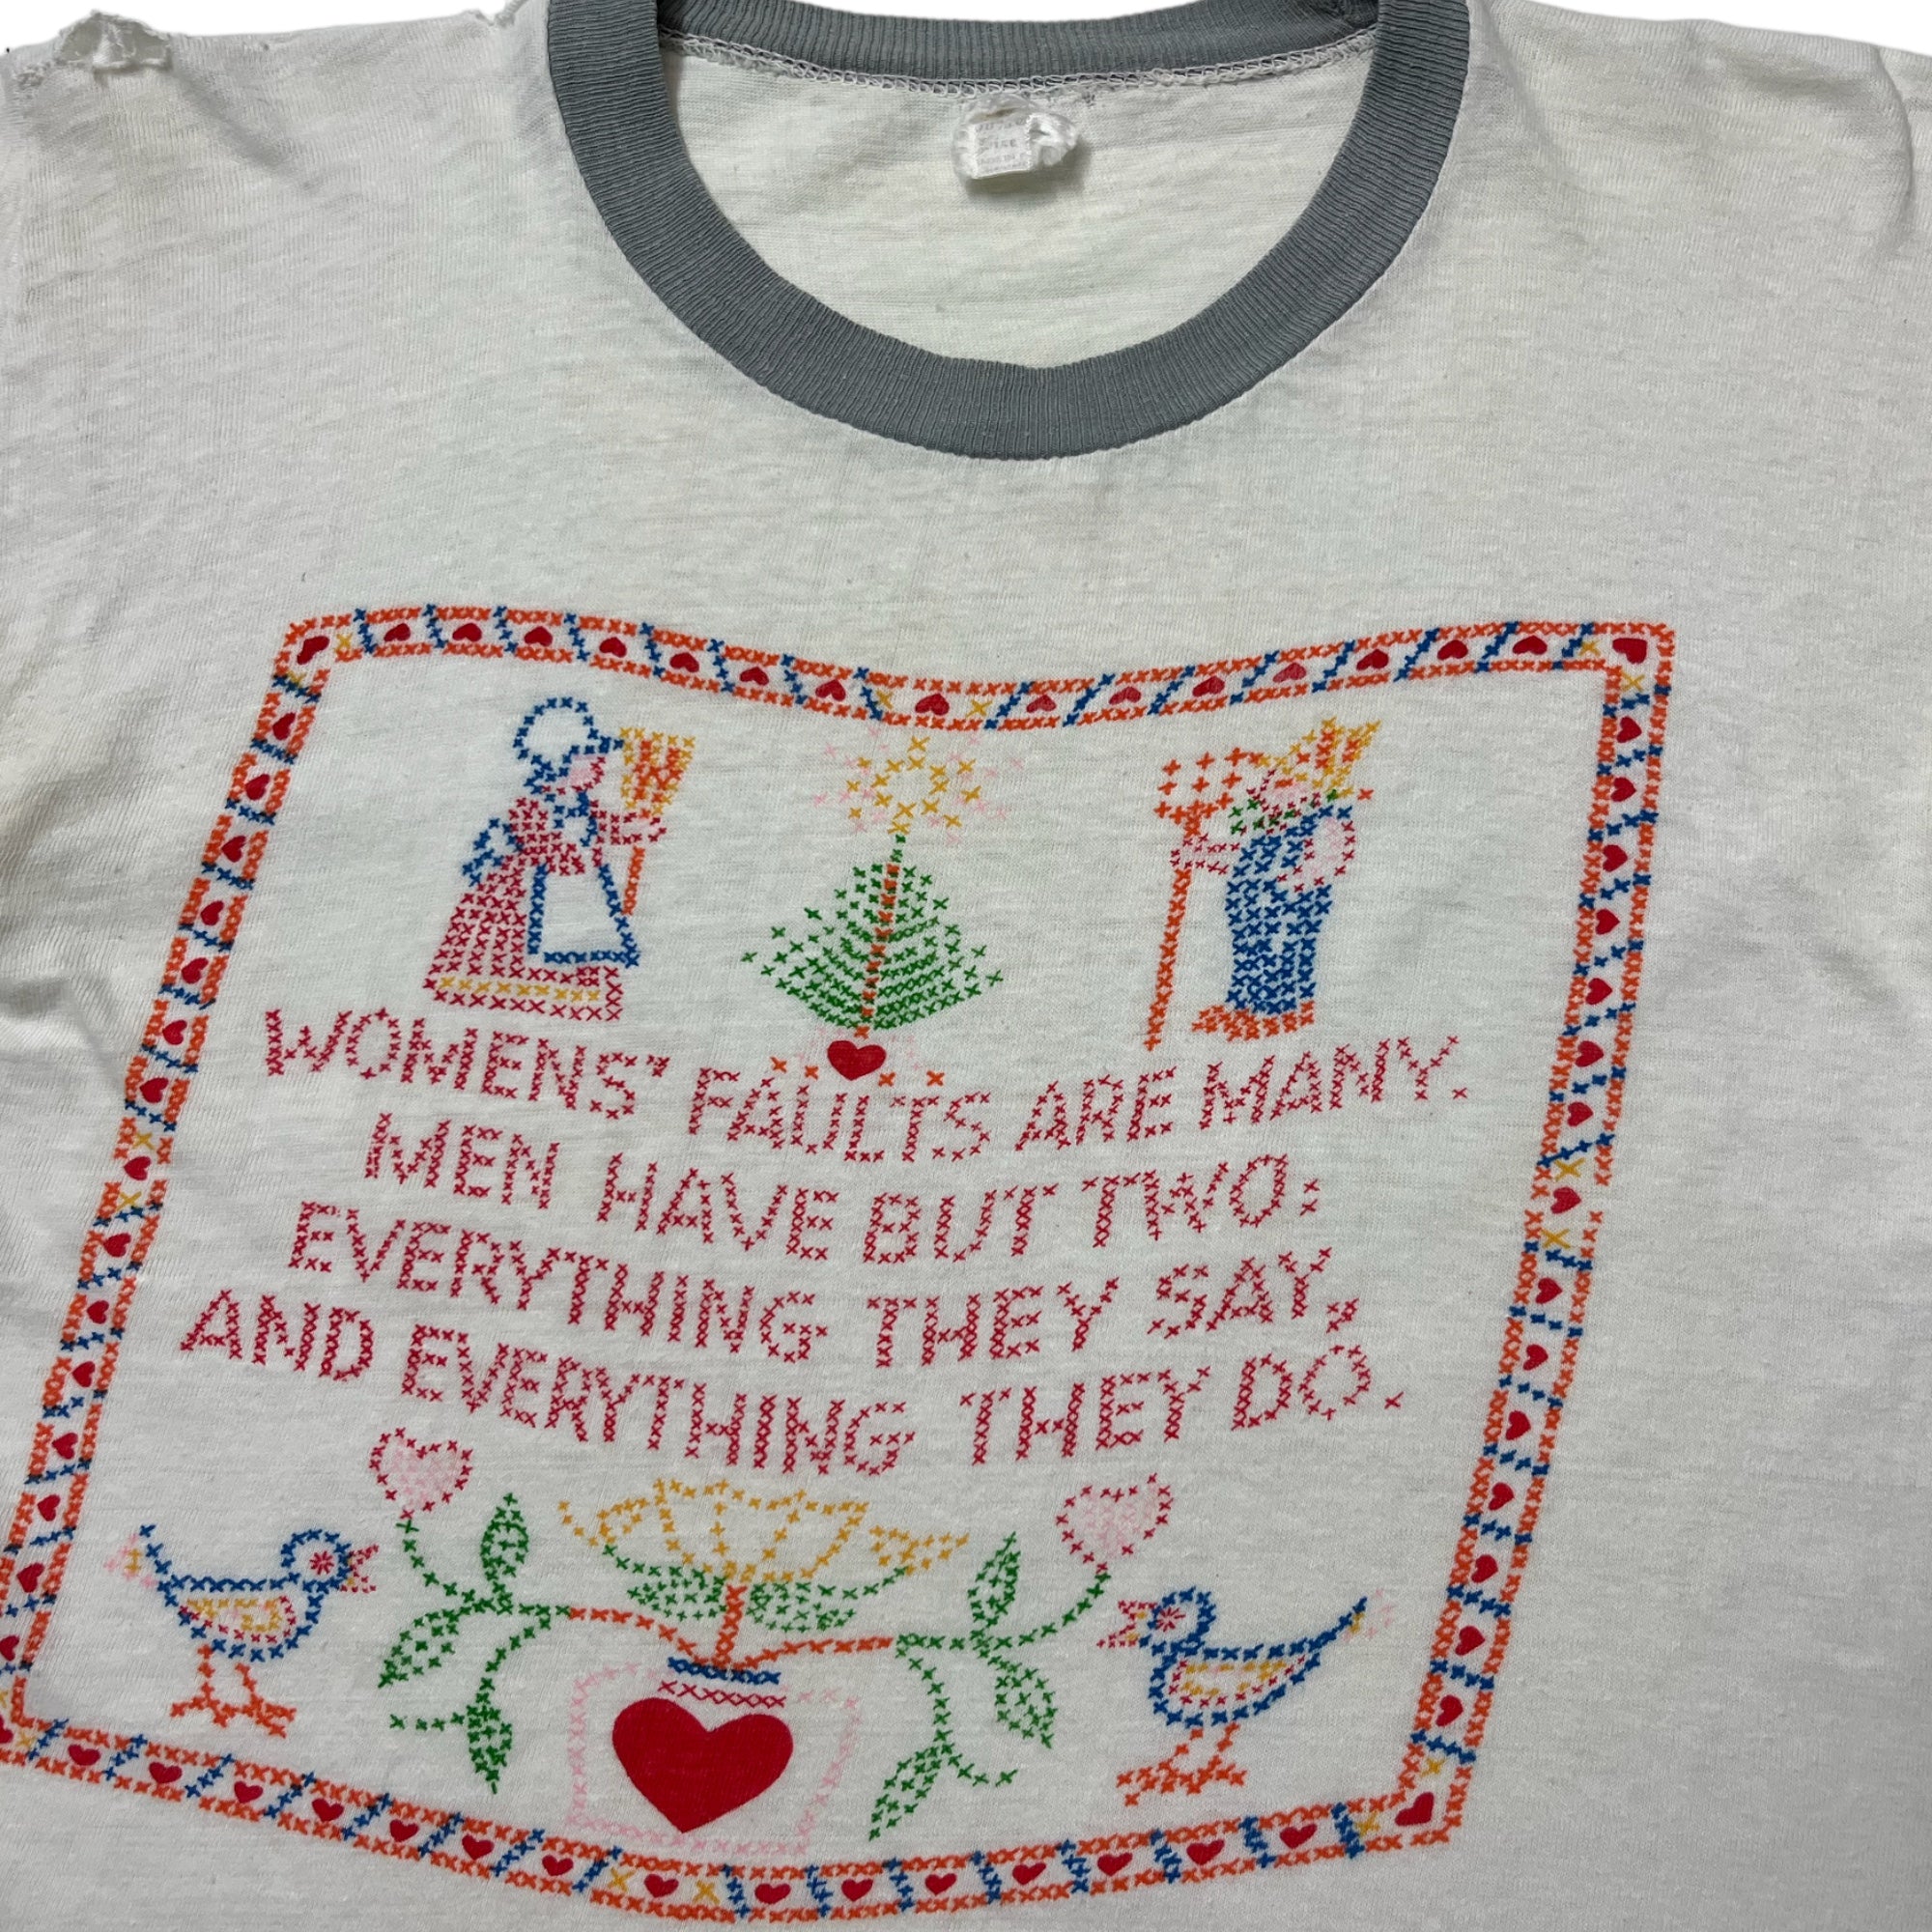 1970s ‘Women’s Faults Are Many But…’ Cross-Stitch Style Ringer T-Shirt - Aged White - S